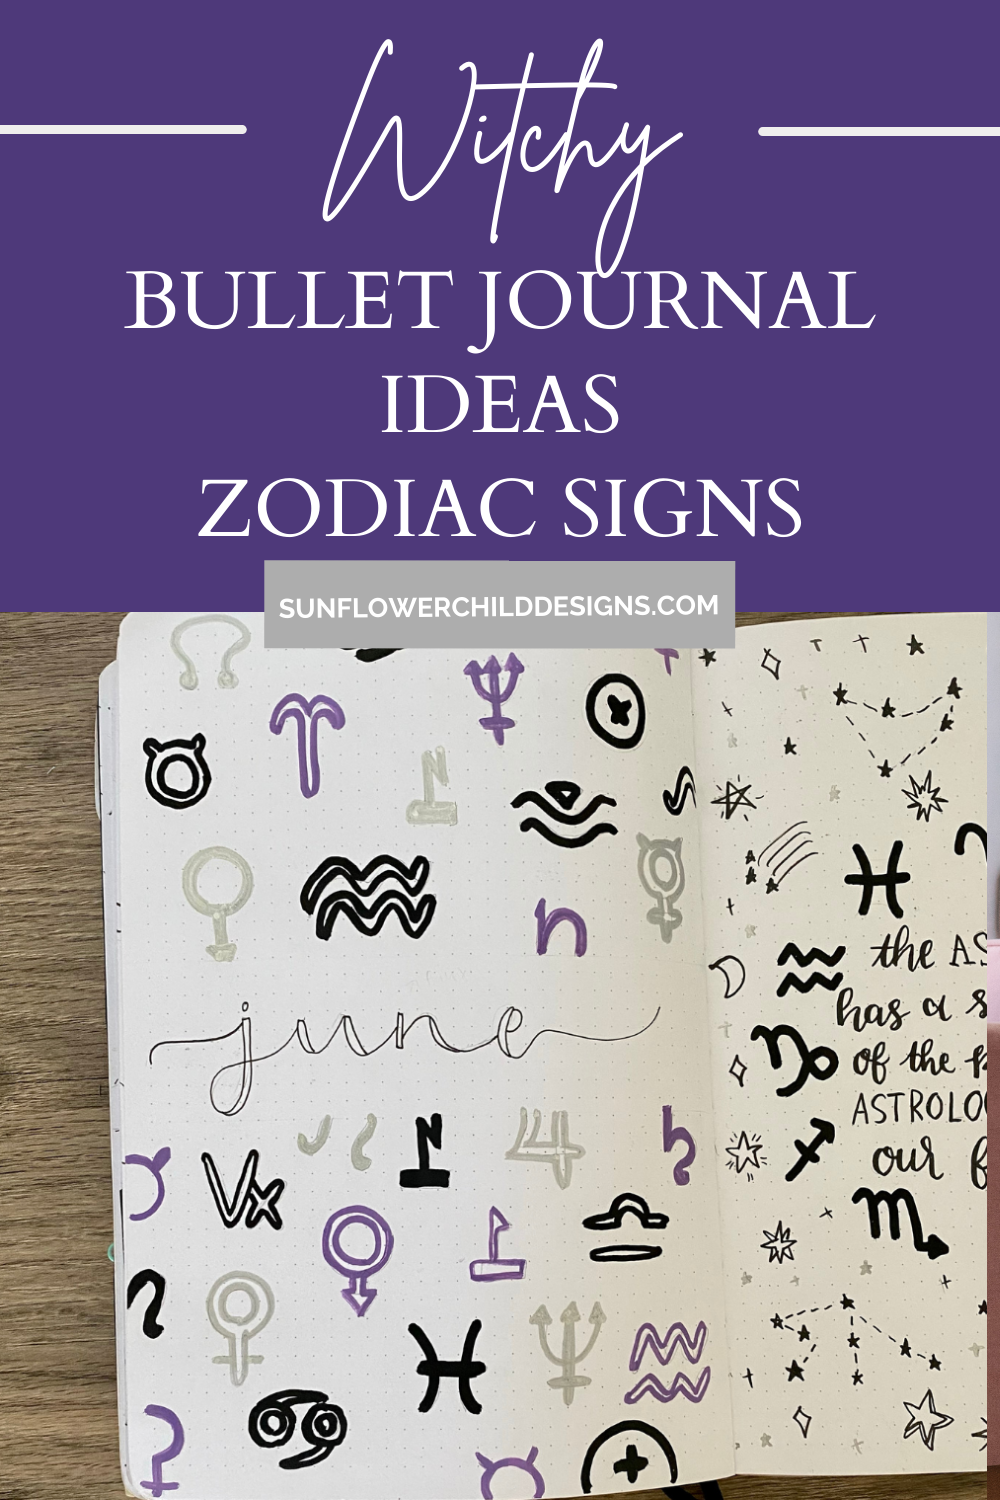 witchy-bullet-journal-ideas-june-bullet-journal-ideas 1.png